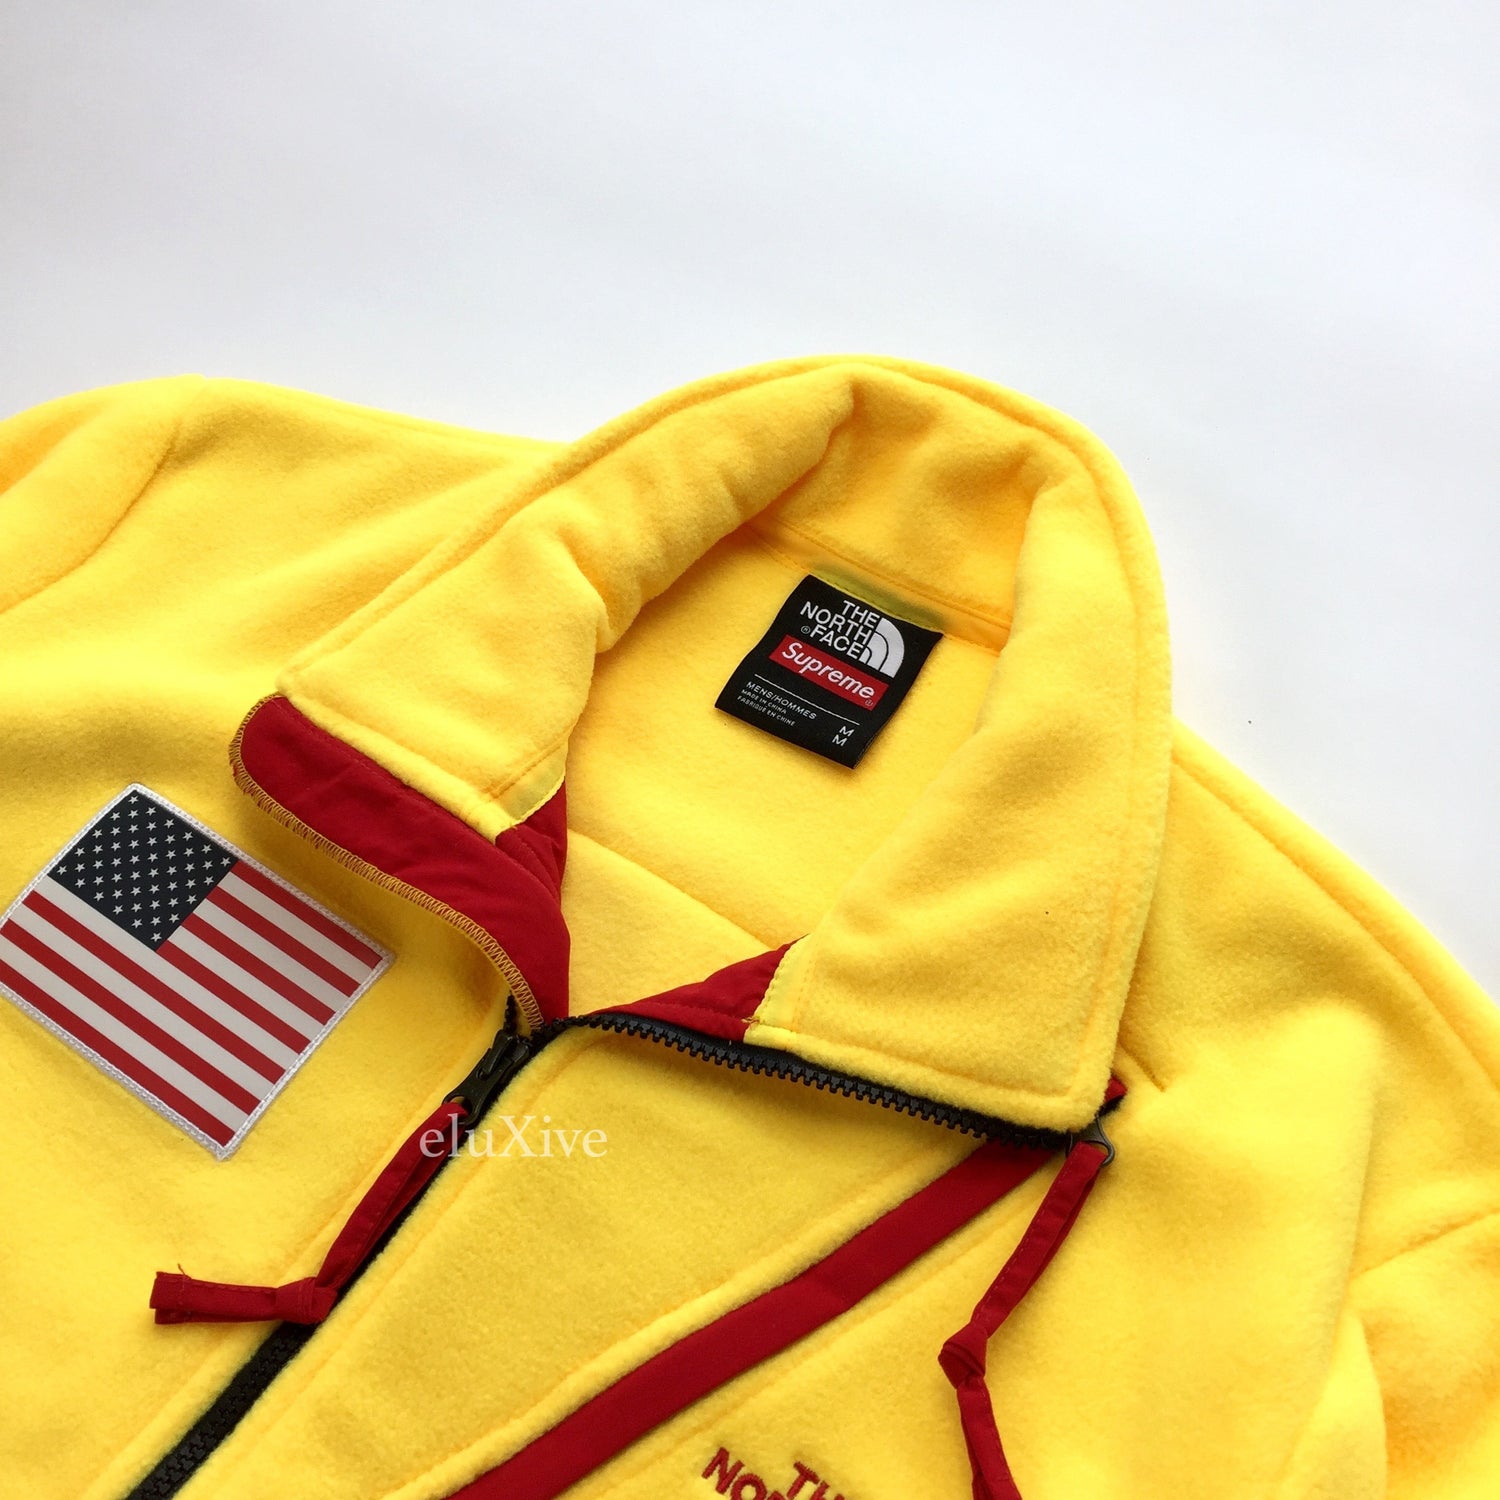 Supreme The North Face Trans Antarctica Expedition Fleece Jacket Yellow  Men's - SS17 - US